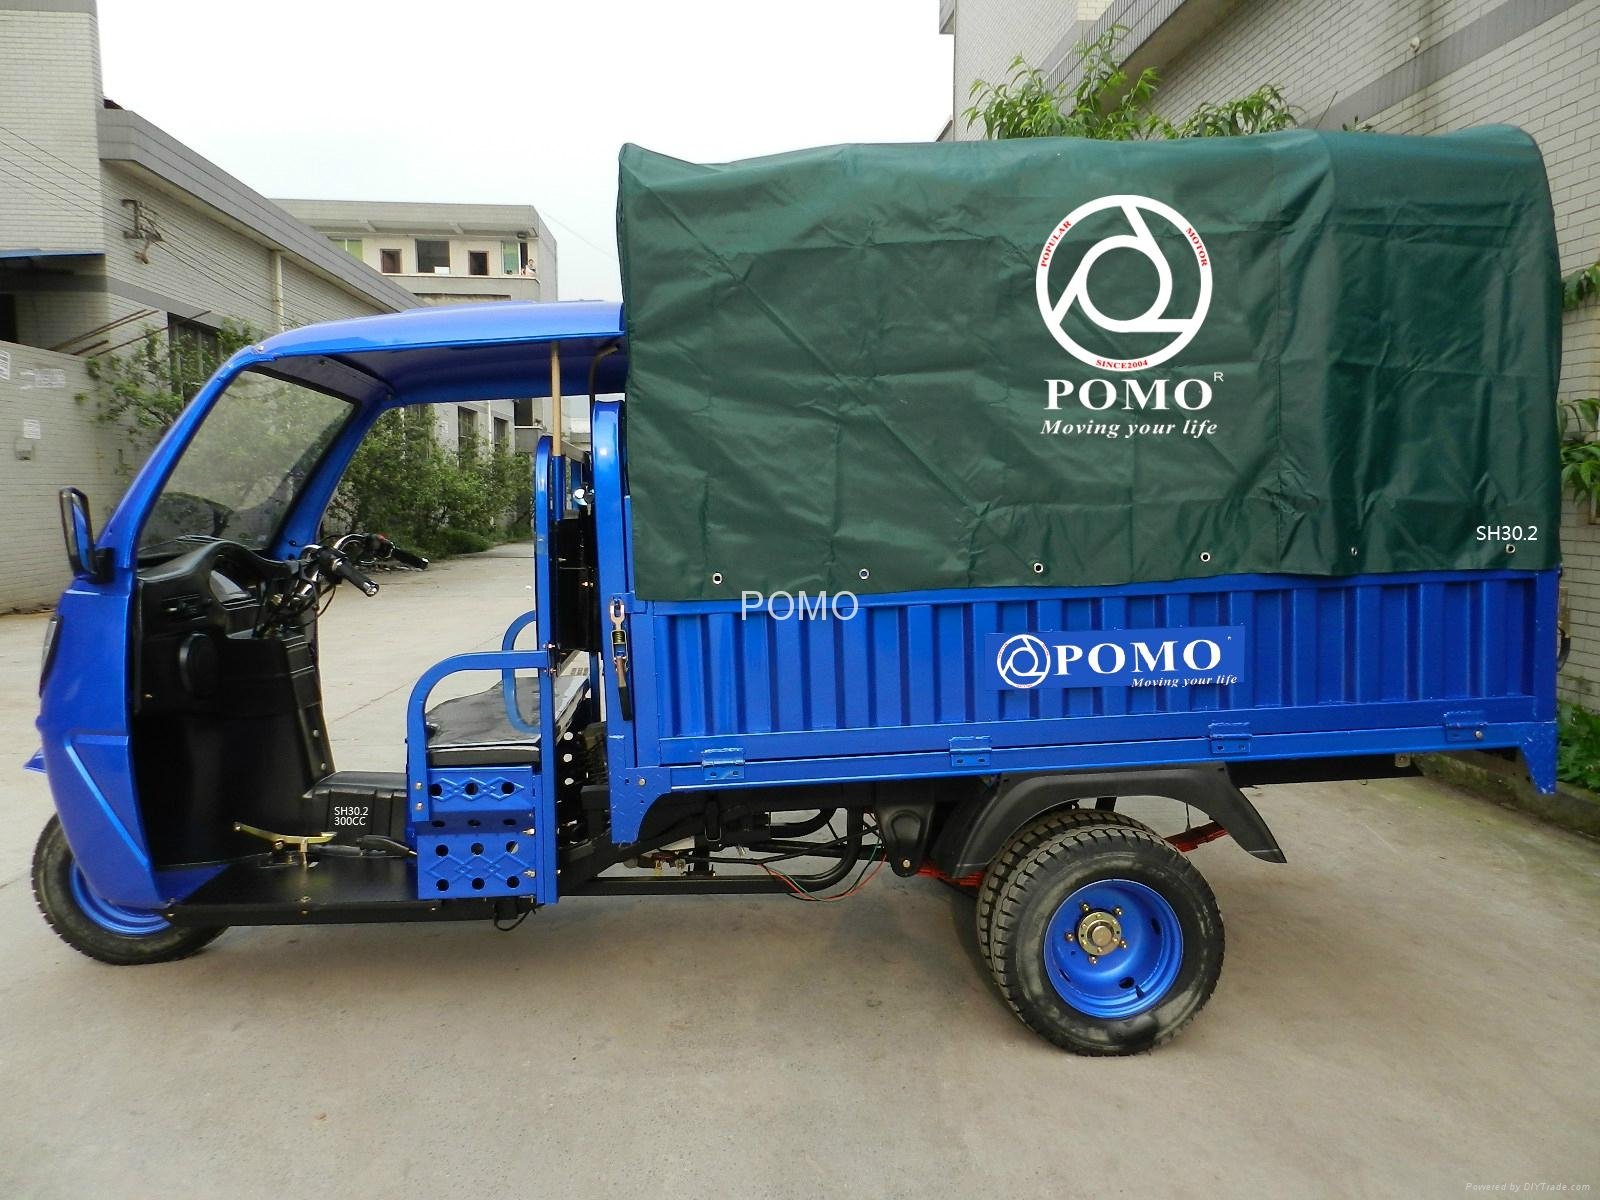 China Manufacturer of 300cc Heavy Load Water Cooling 5 Wheel Tricycle 2